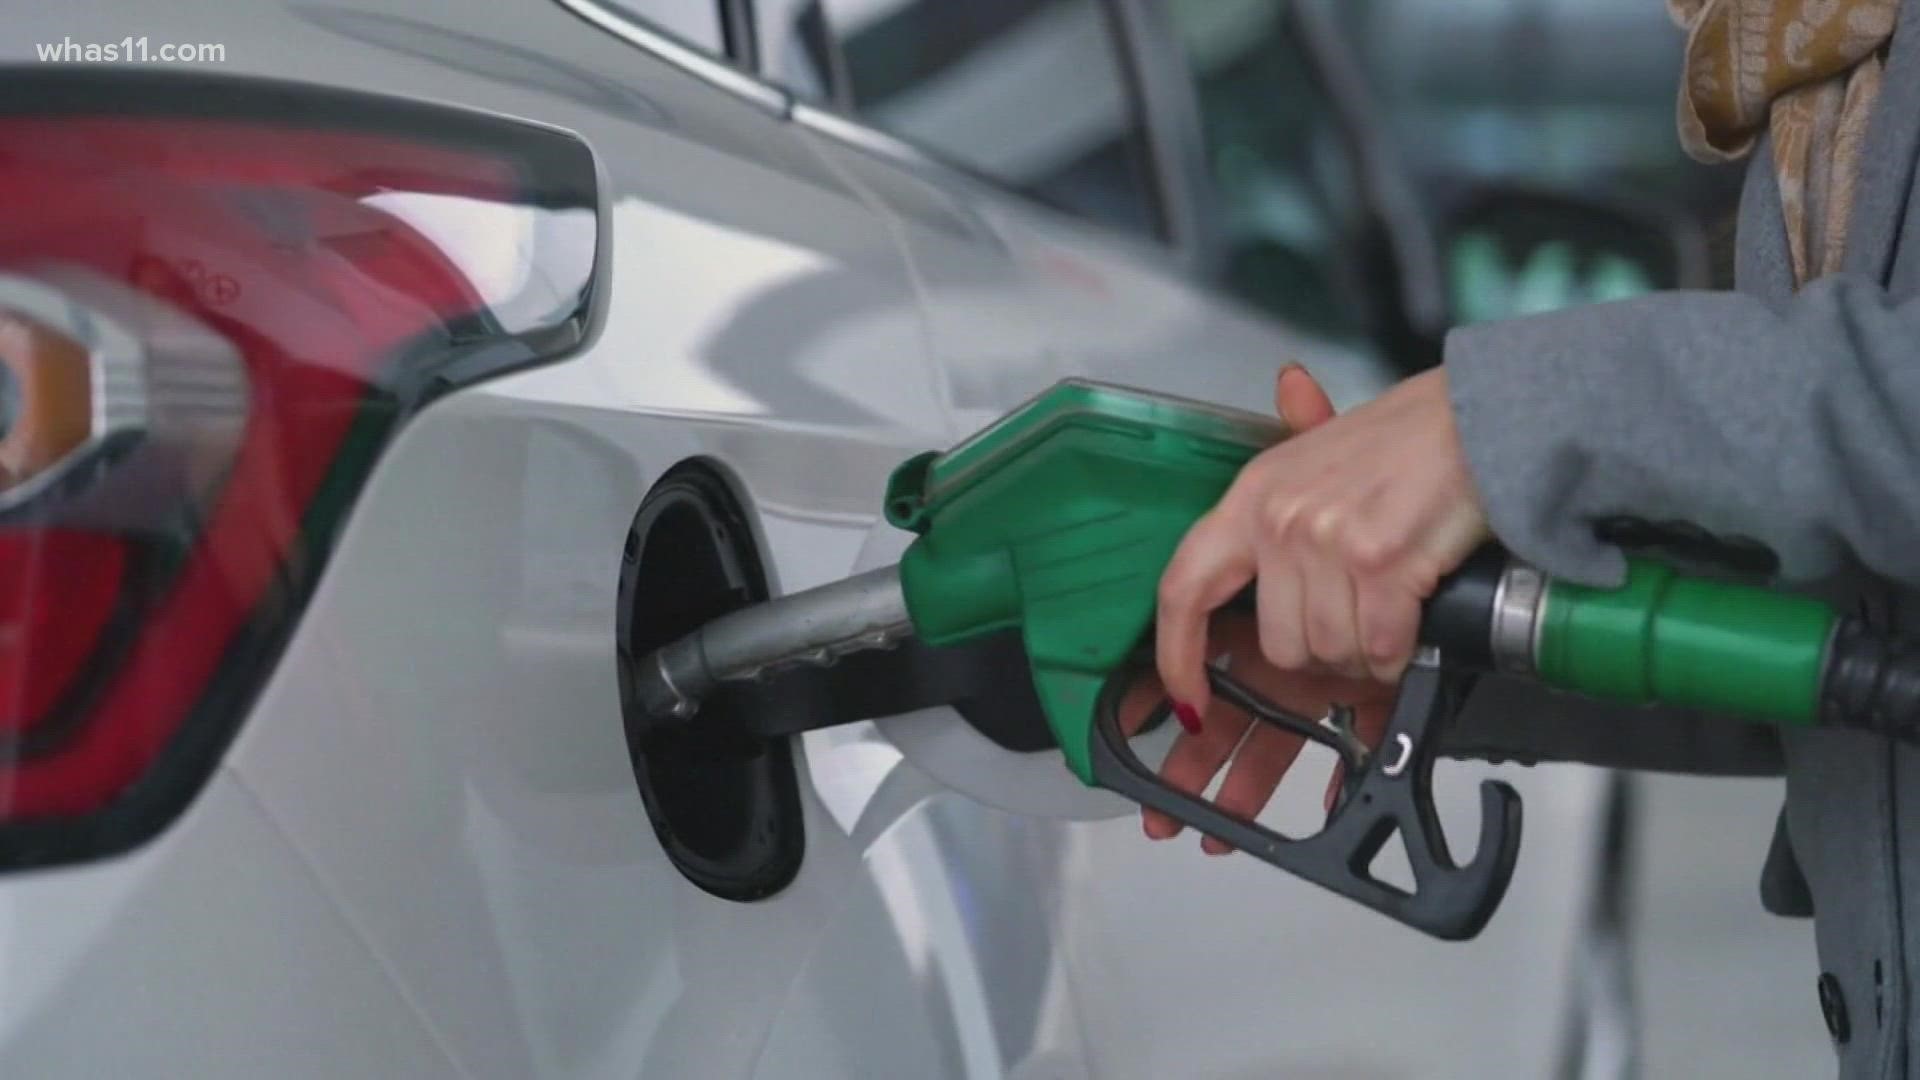 Gas across the country has surpassed $4 a gallon for the first time since June 8, 2008.